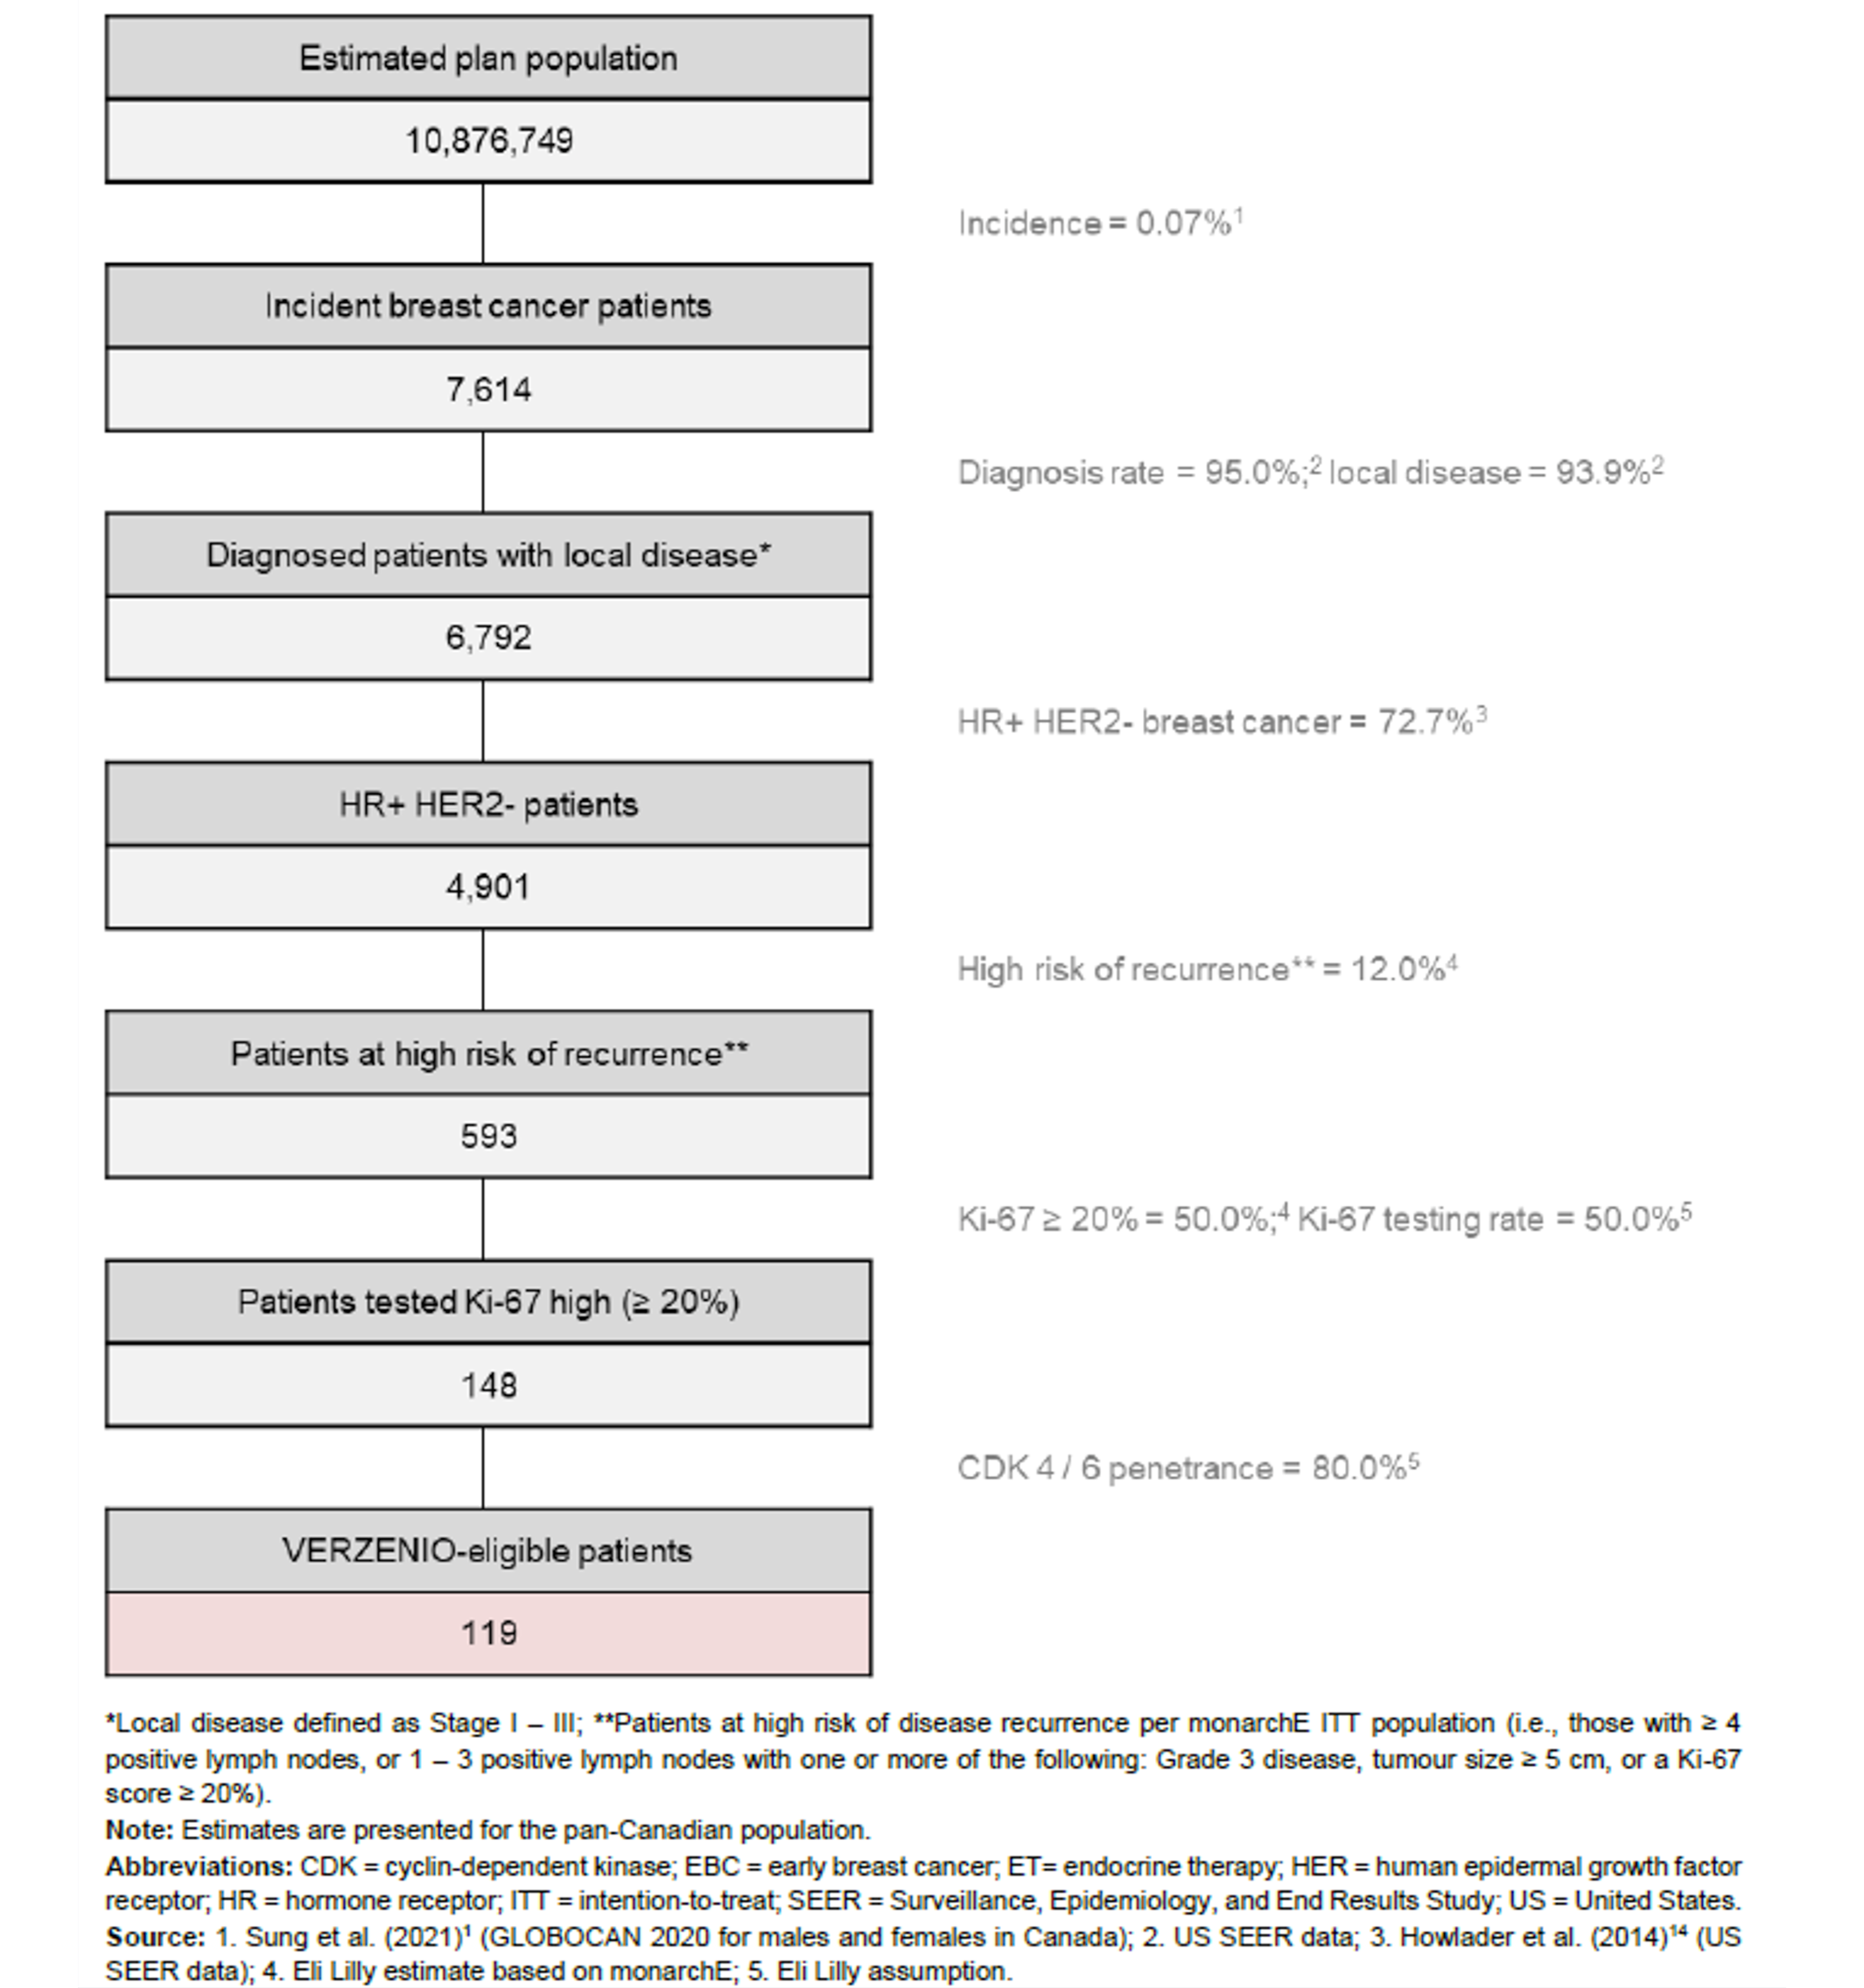 A flow chart describing the identification of the eligible population from estimated plan population through the various eligibility criteria until the final Verzenio-eligible patients box.